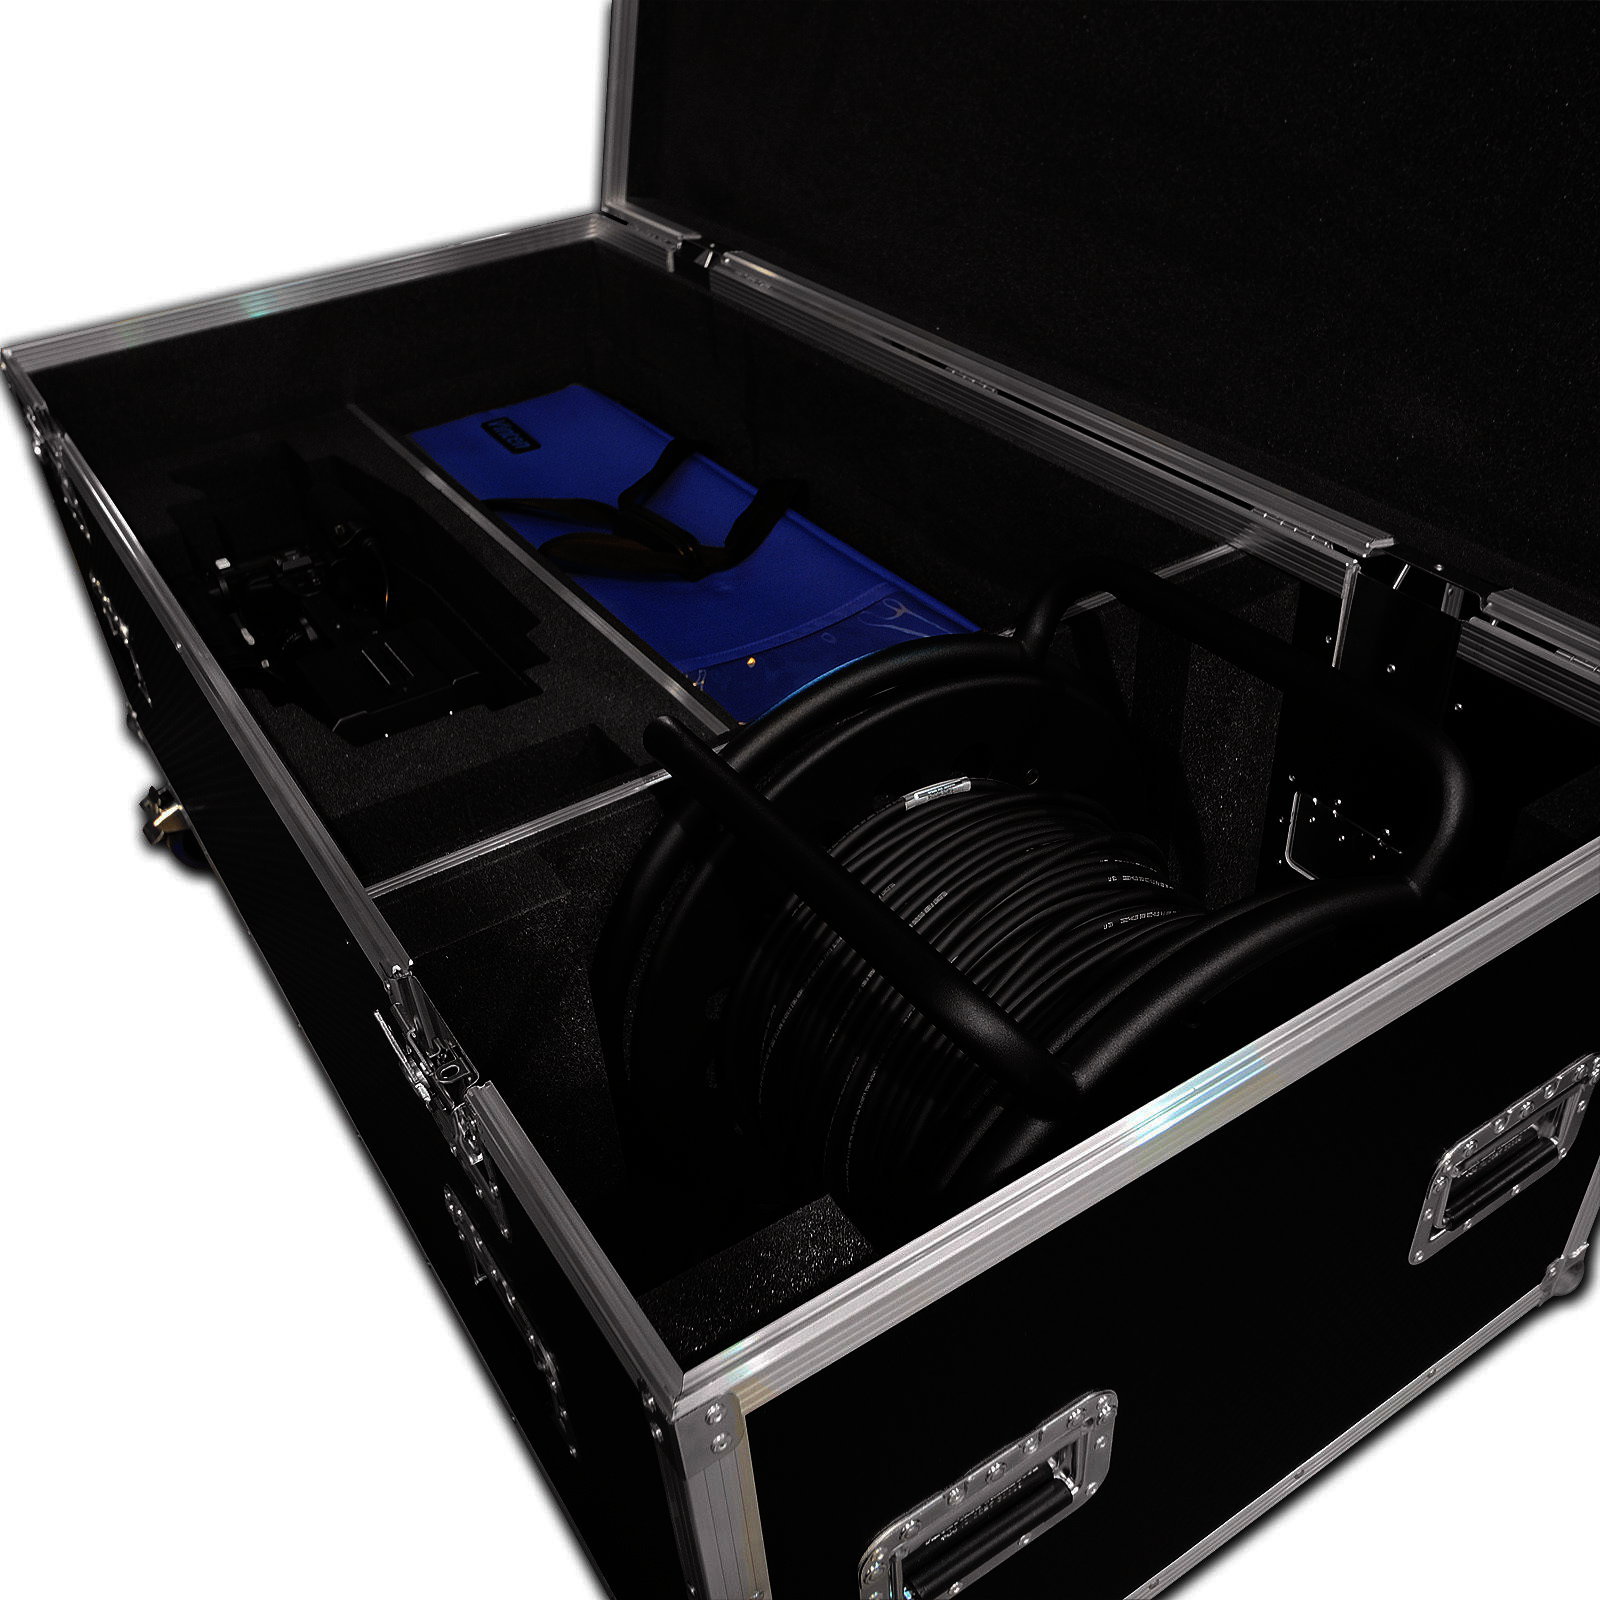 Custom Camcorder Flight Case With Lens Space + Cable Drum